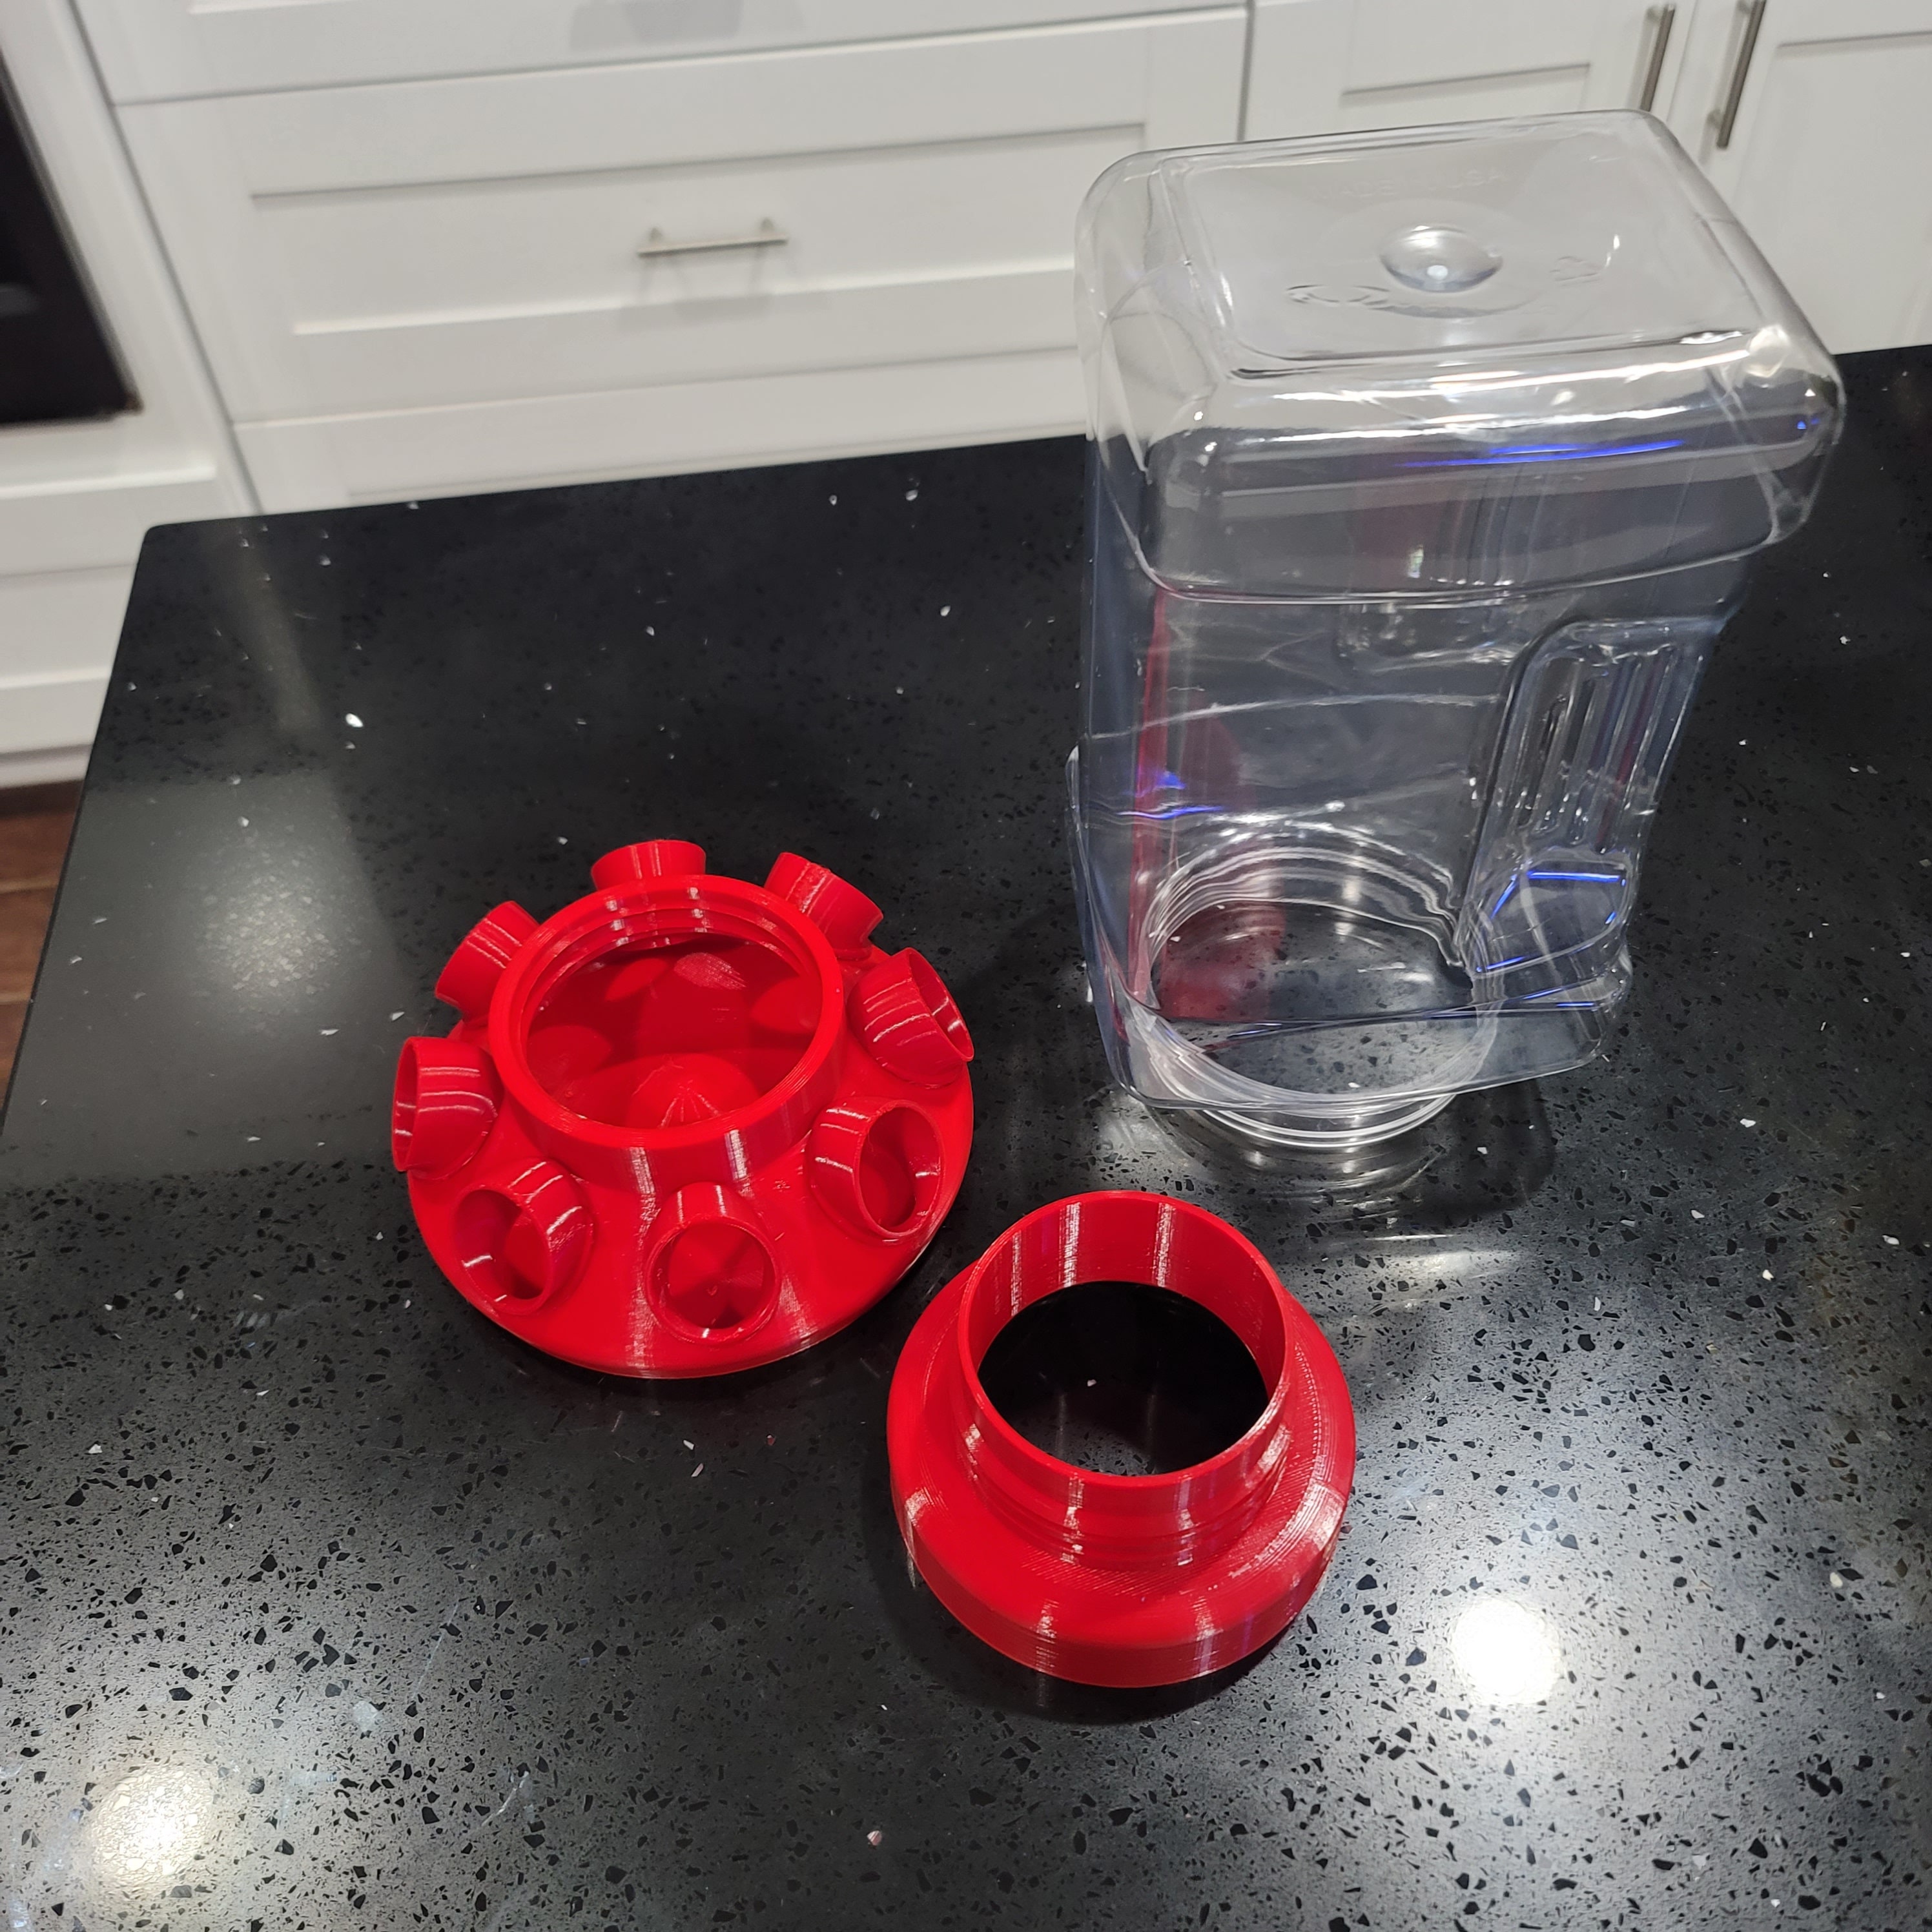 Quail & Chick Feed Saver Port Made in USA 3D Printed Reduces Food Waste and  Saves Money DIY Bucket Pail Bin Container 